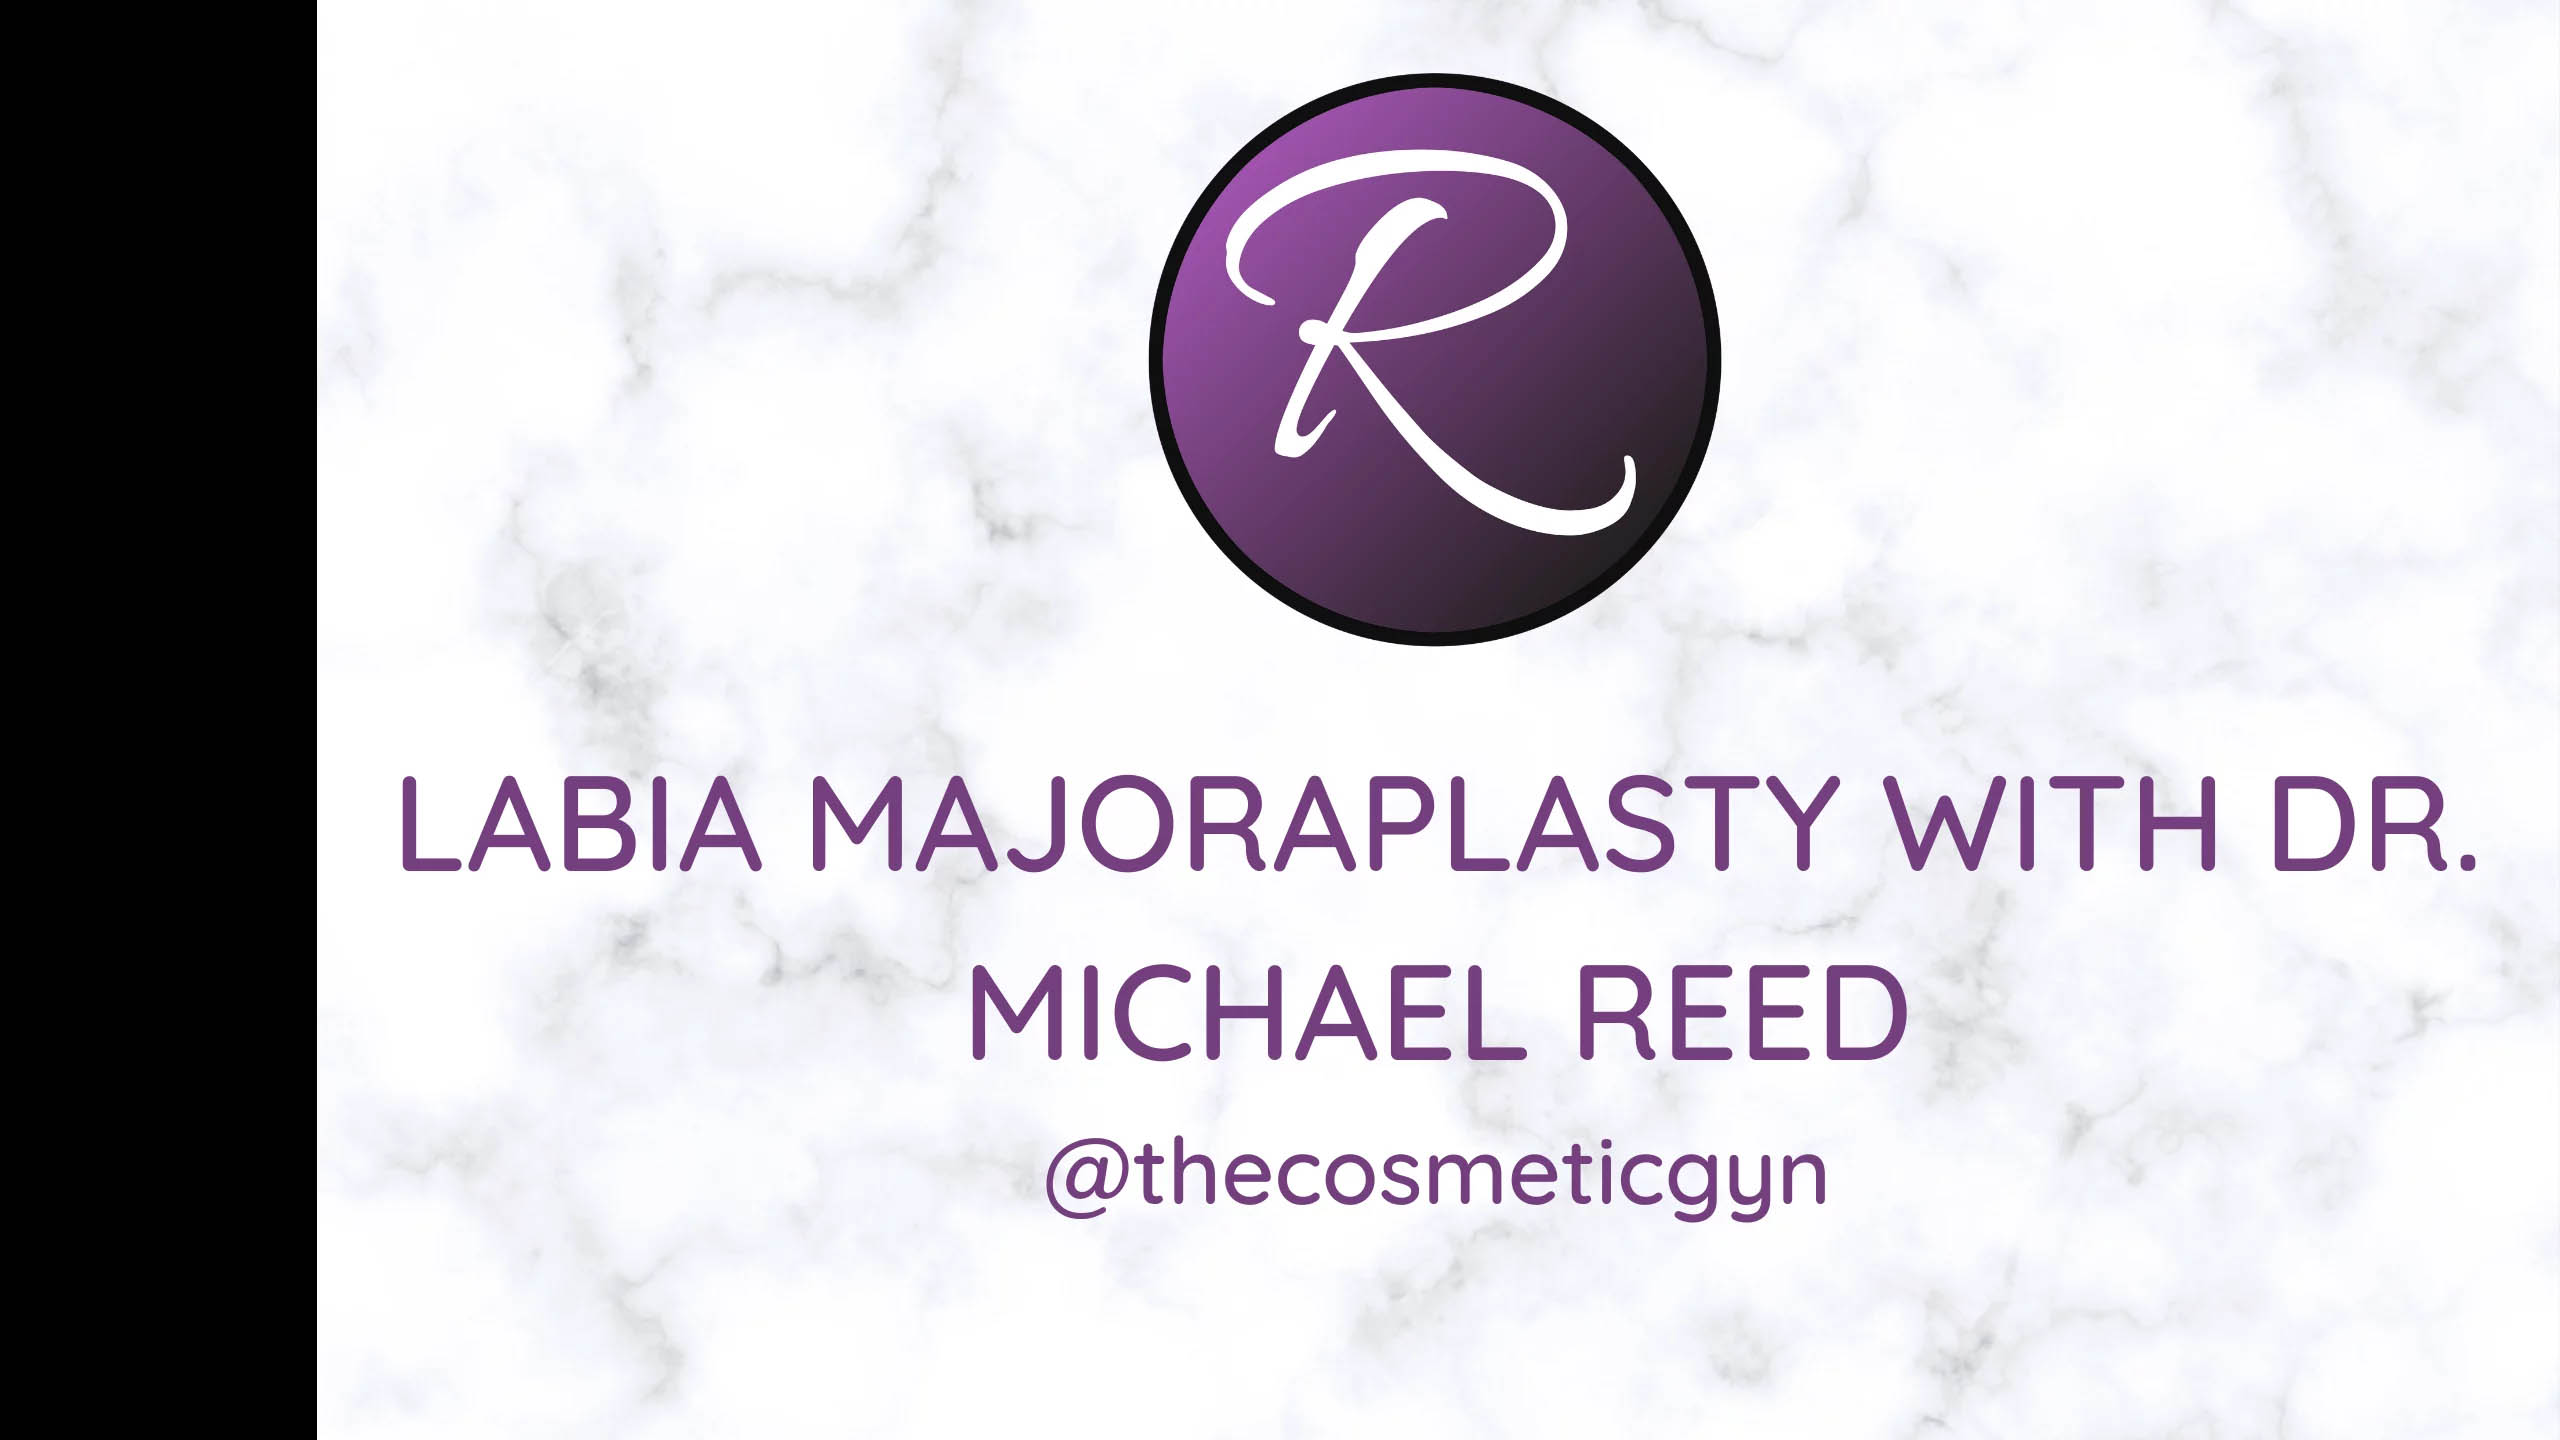 Labia Majoraplasty with Dr. Michael Reed